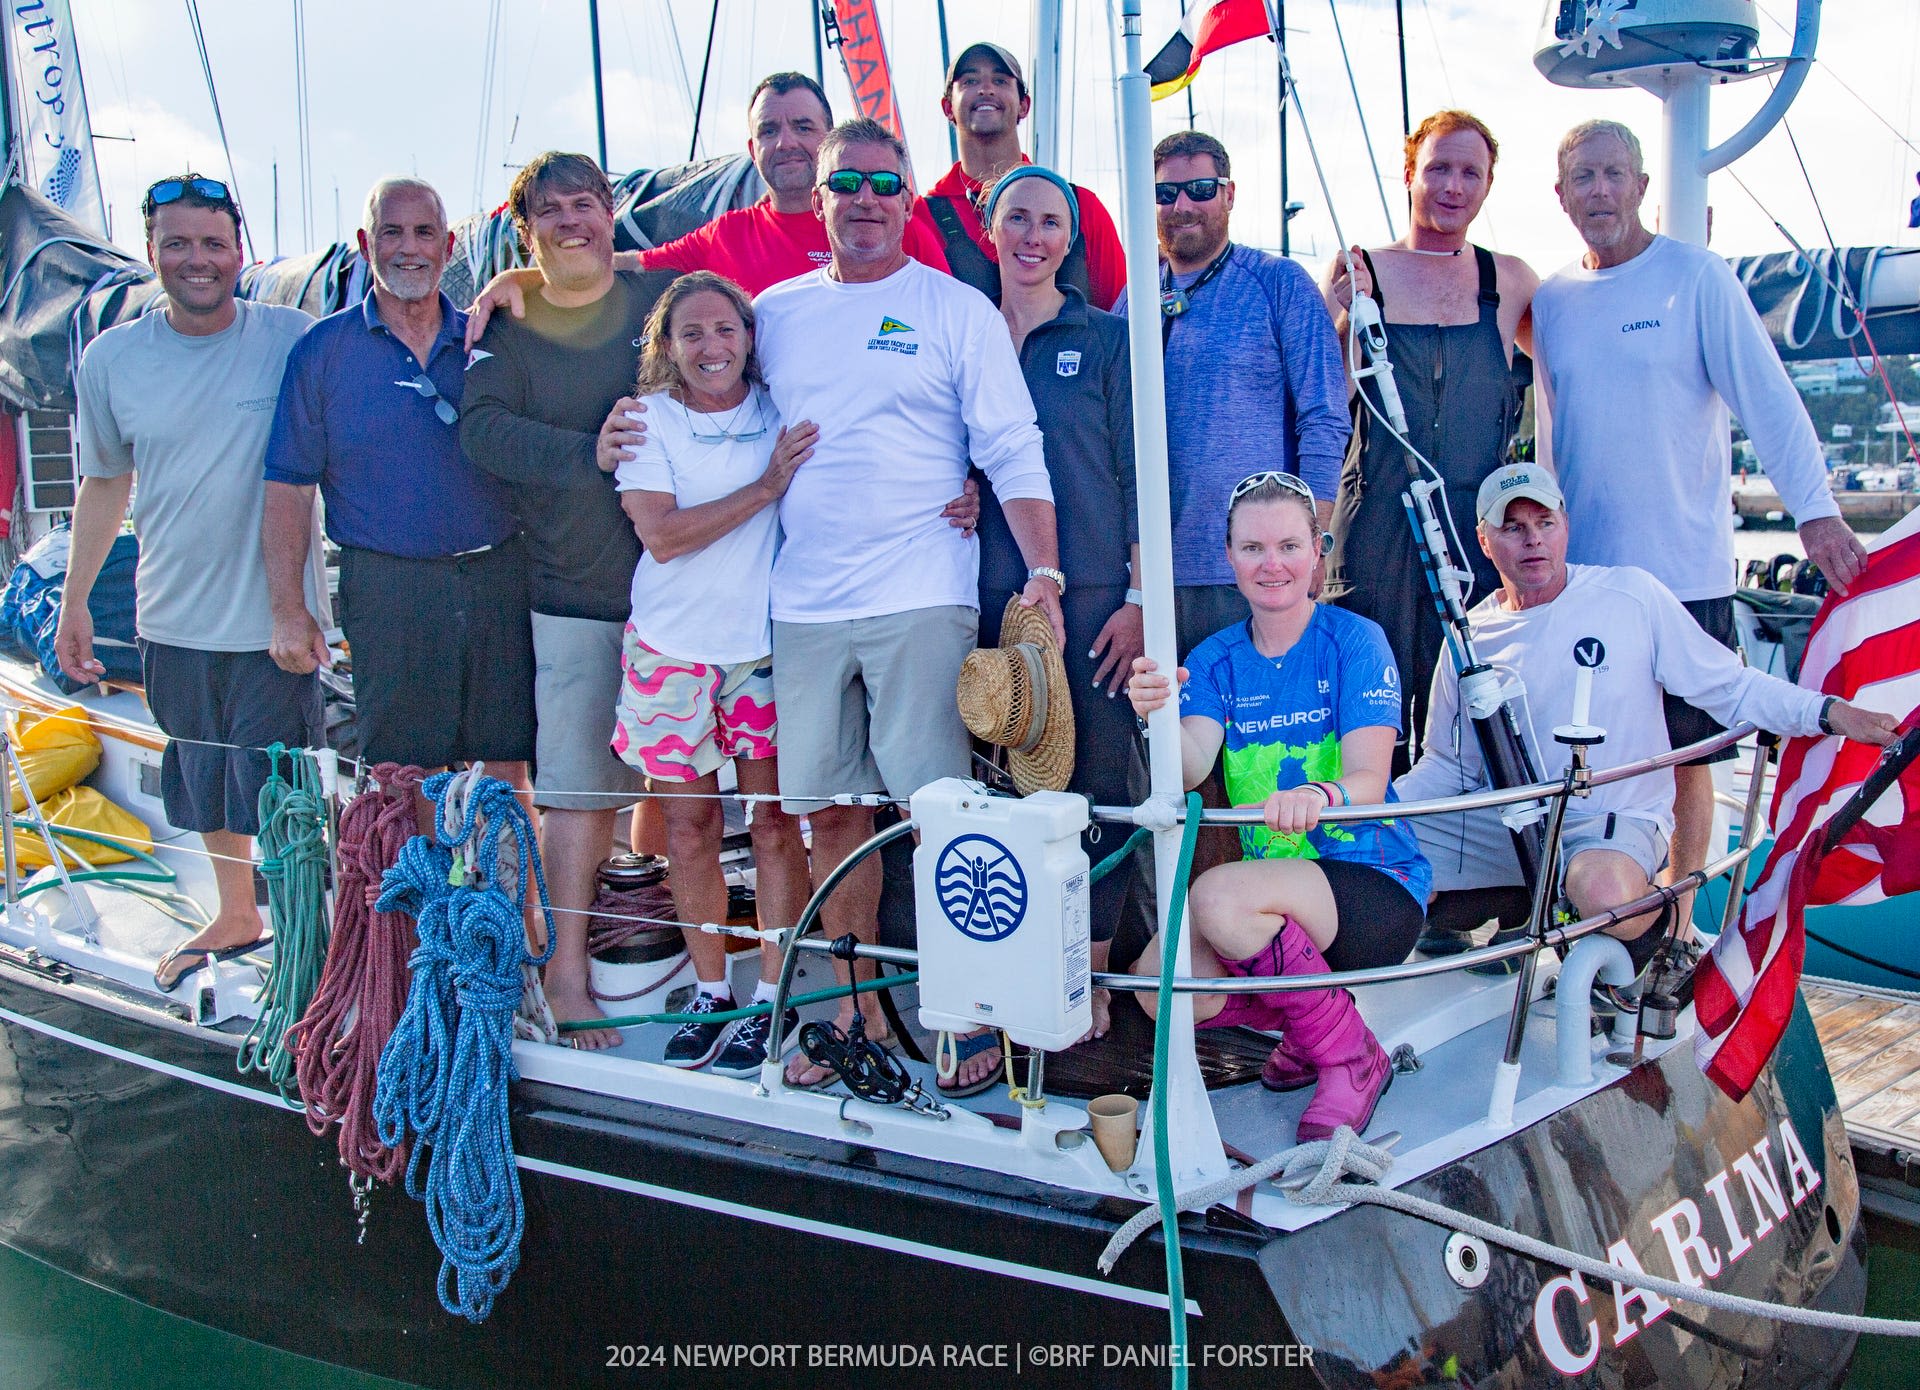 Carina takes Newport Bermuda Race. How a penalty helped secure the win